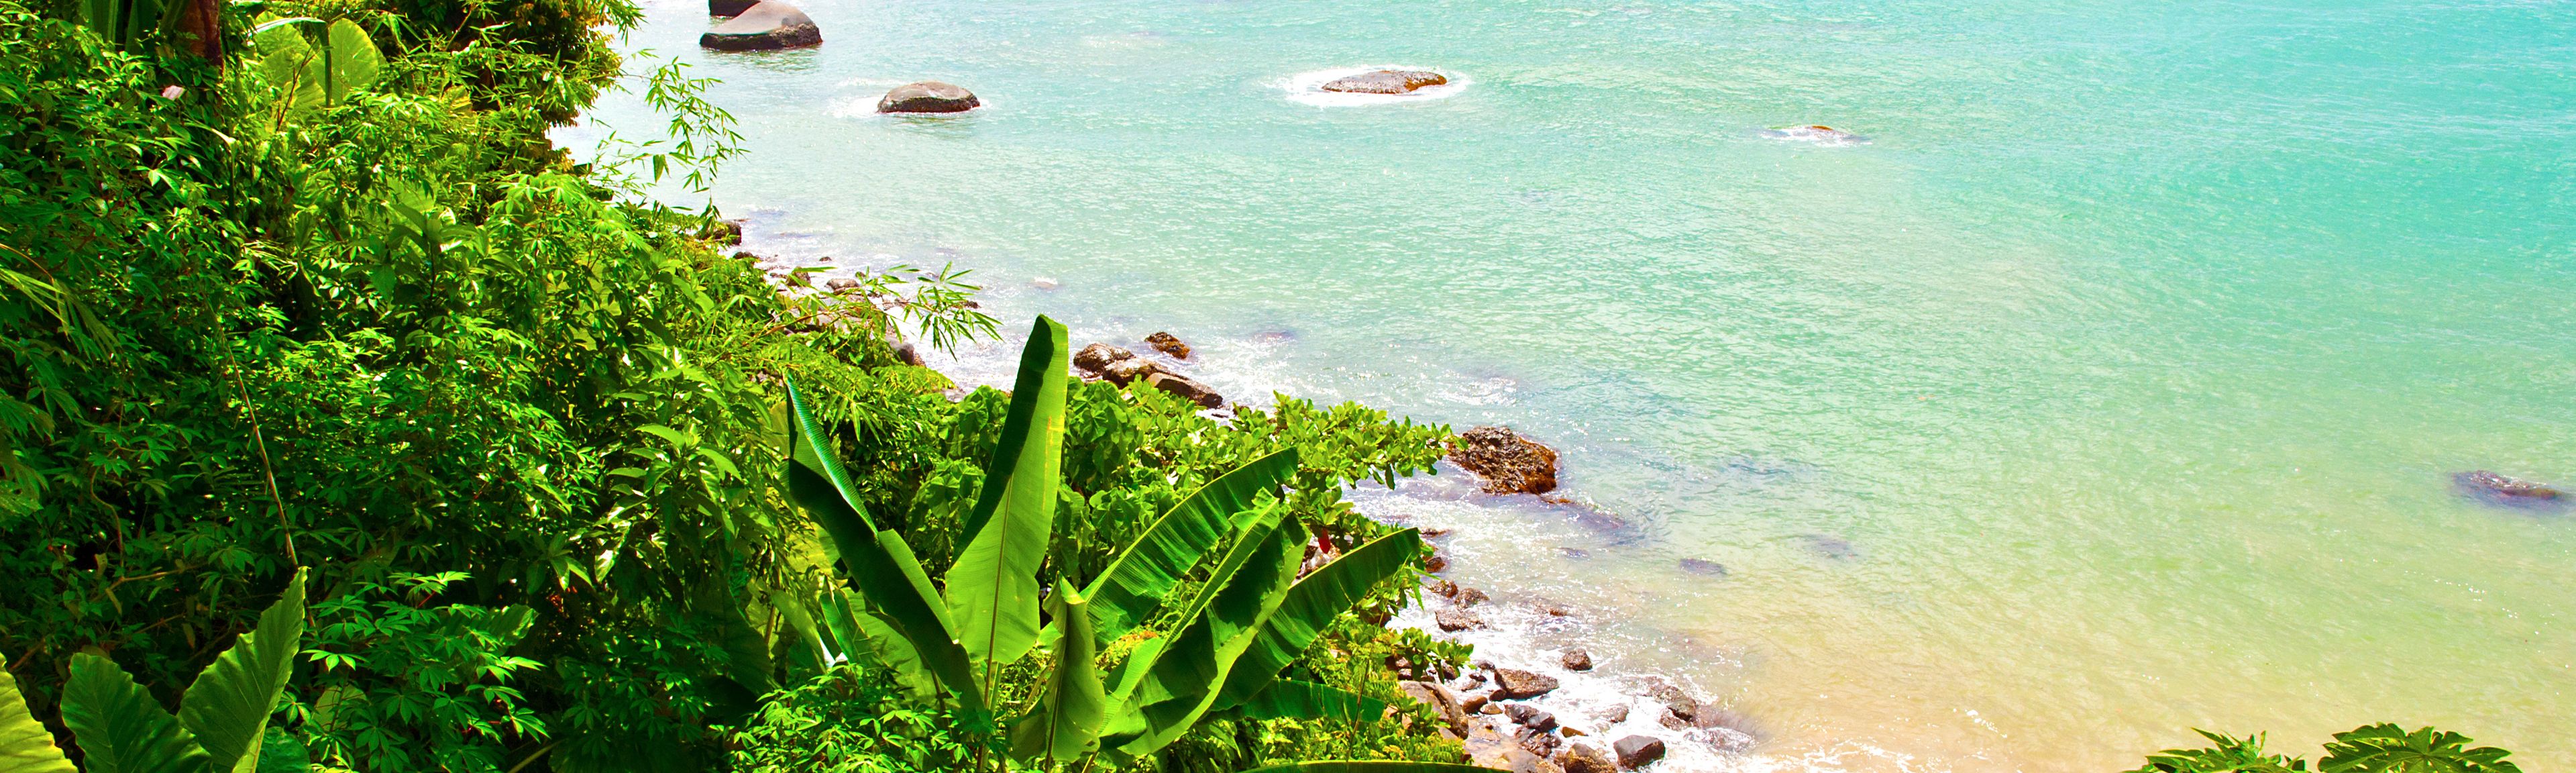 Fantastic views of Thailand's flora and the sea